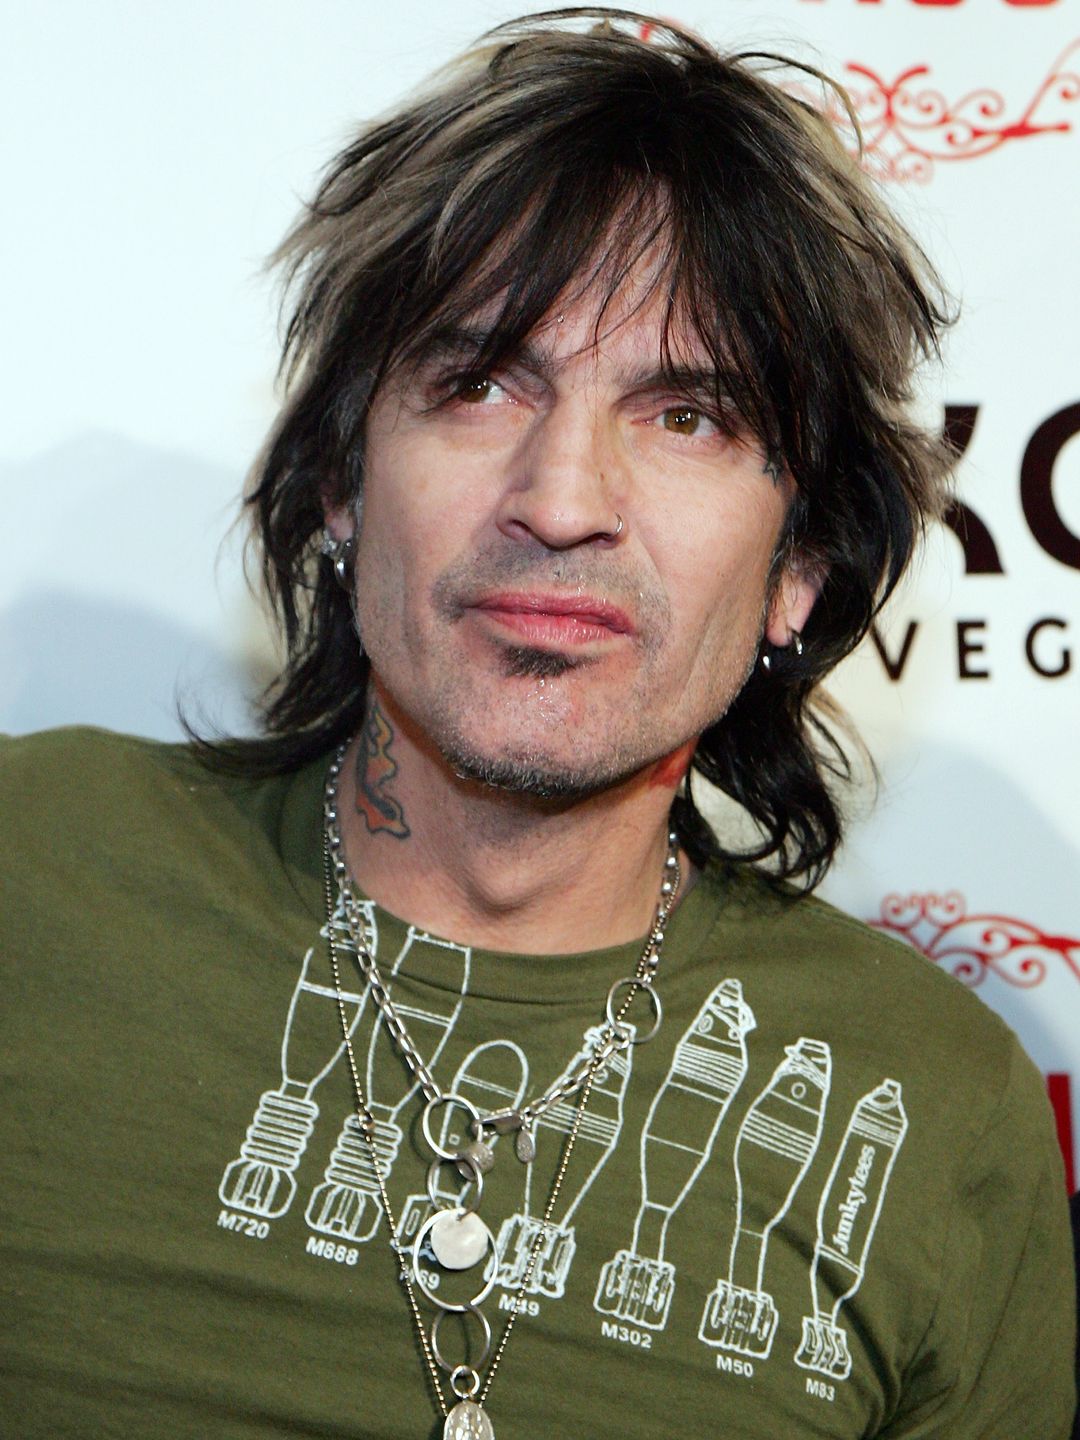 Tommy Lee who is he